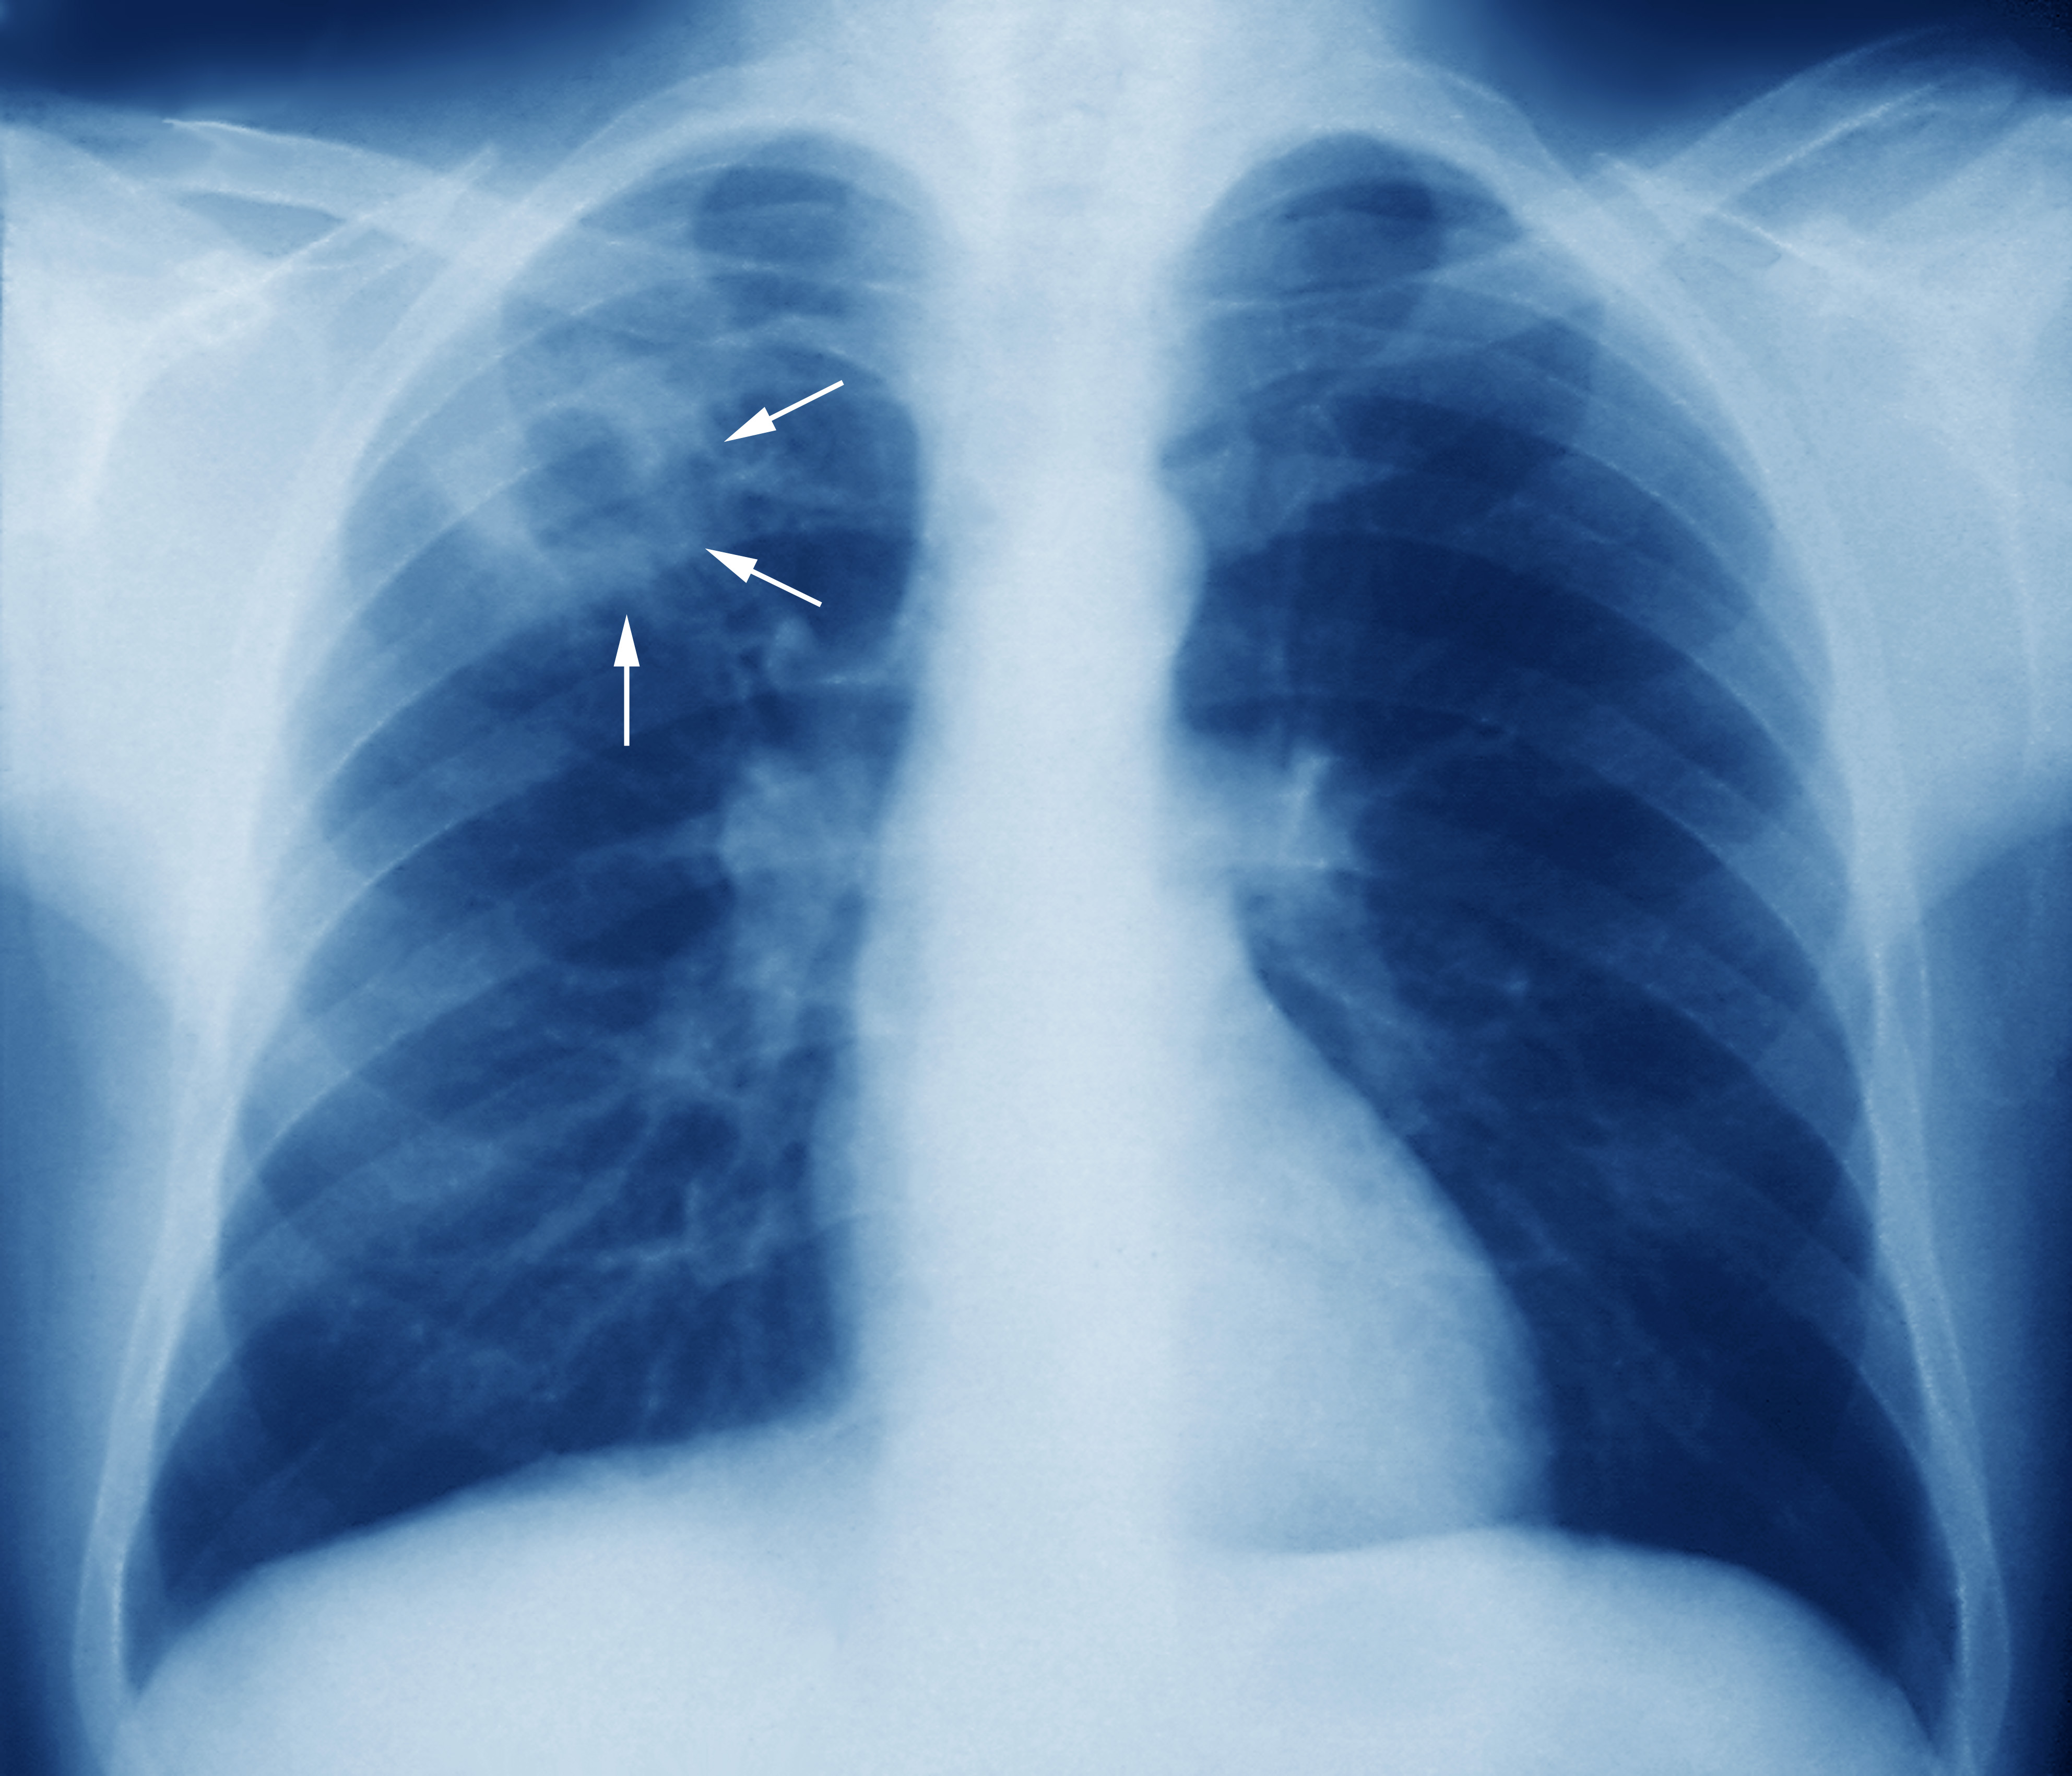 http://medicinsk.net/wp-content/uploads/2020/12/m2700245-tuberculosis-chest-x-ray-science-photo-library-high.jpg